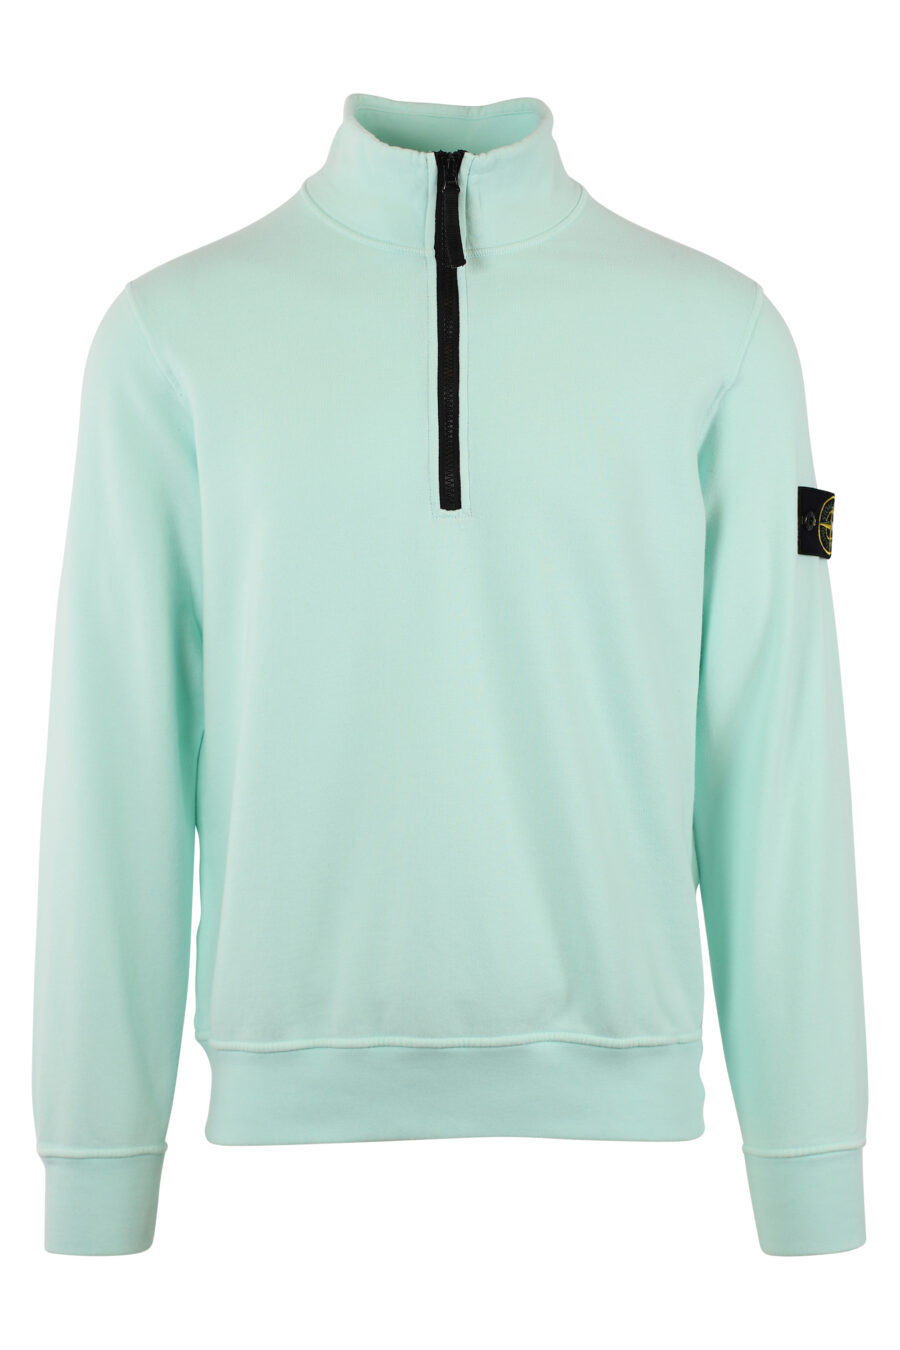 Light blue sweatshirt with short zip and patch - IMG 1474